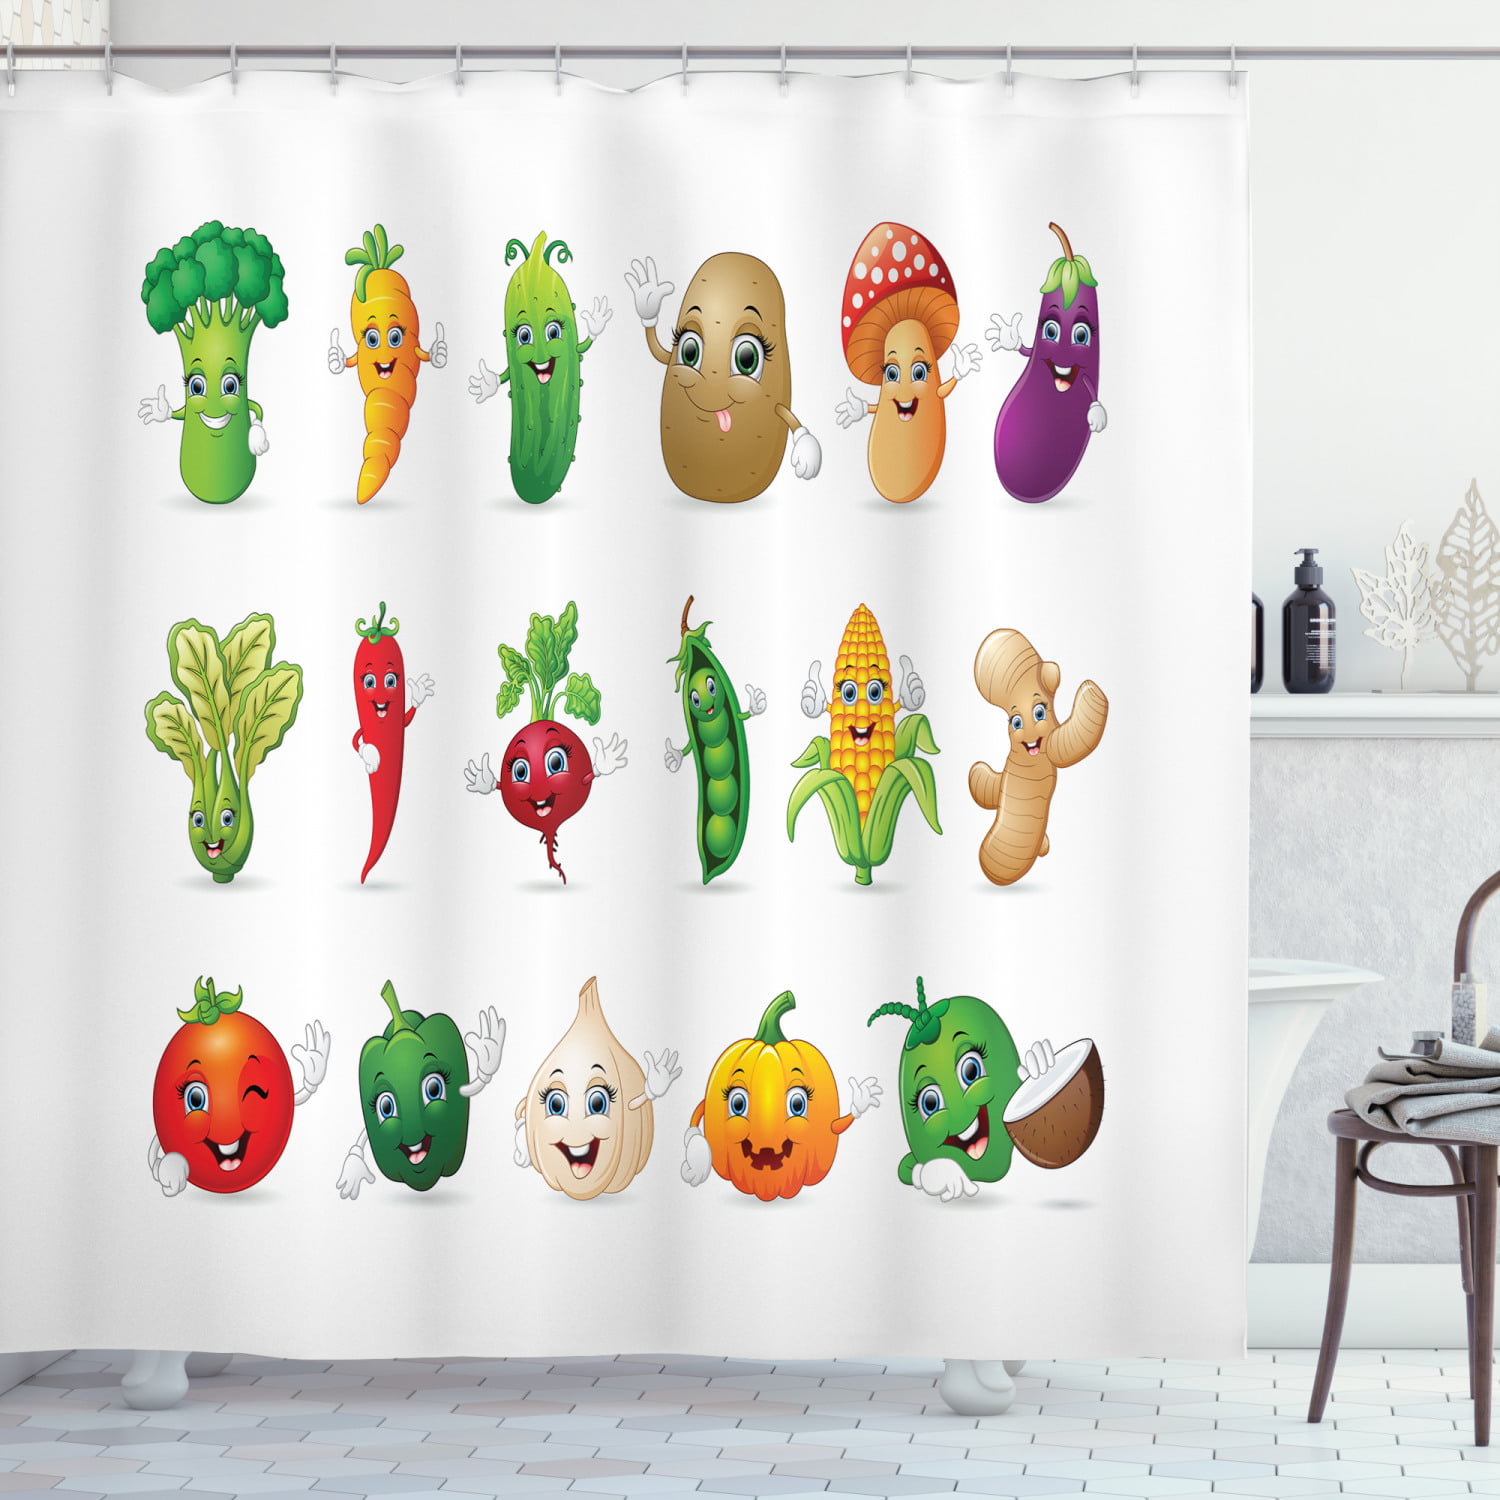 Vegetable Shower Curtain, Funny Various Cartoon Characters with Smiley Faces  Happy Farm Theme Kids Nursery, Fabric Bathroom Set with Hooks, 69W X 70L  Inches, Multicolor, by Ambesonne 